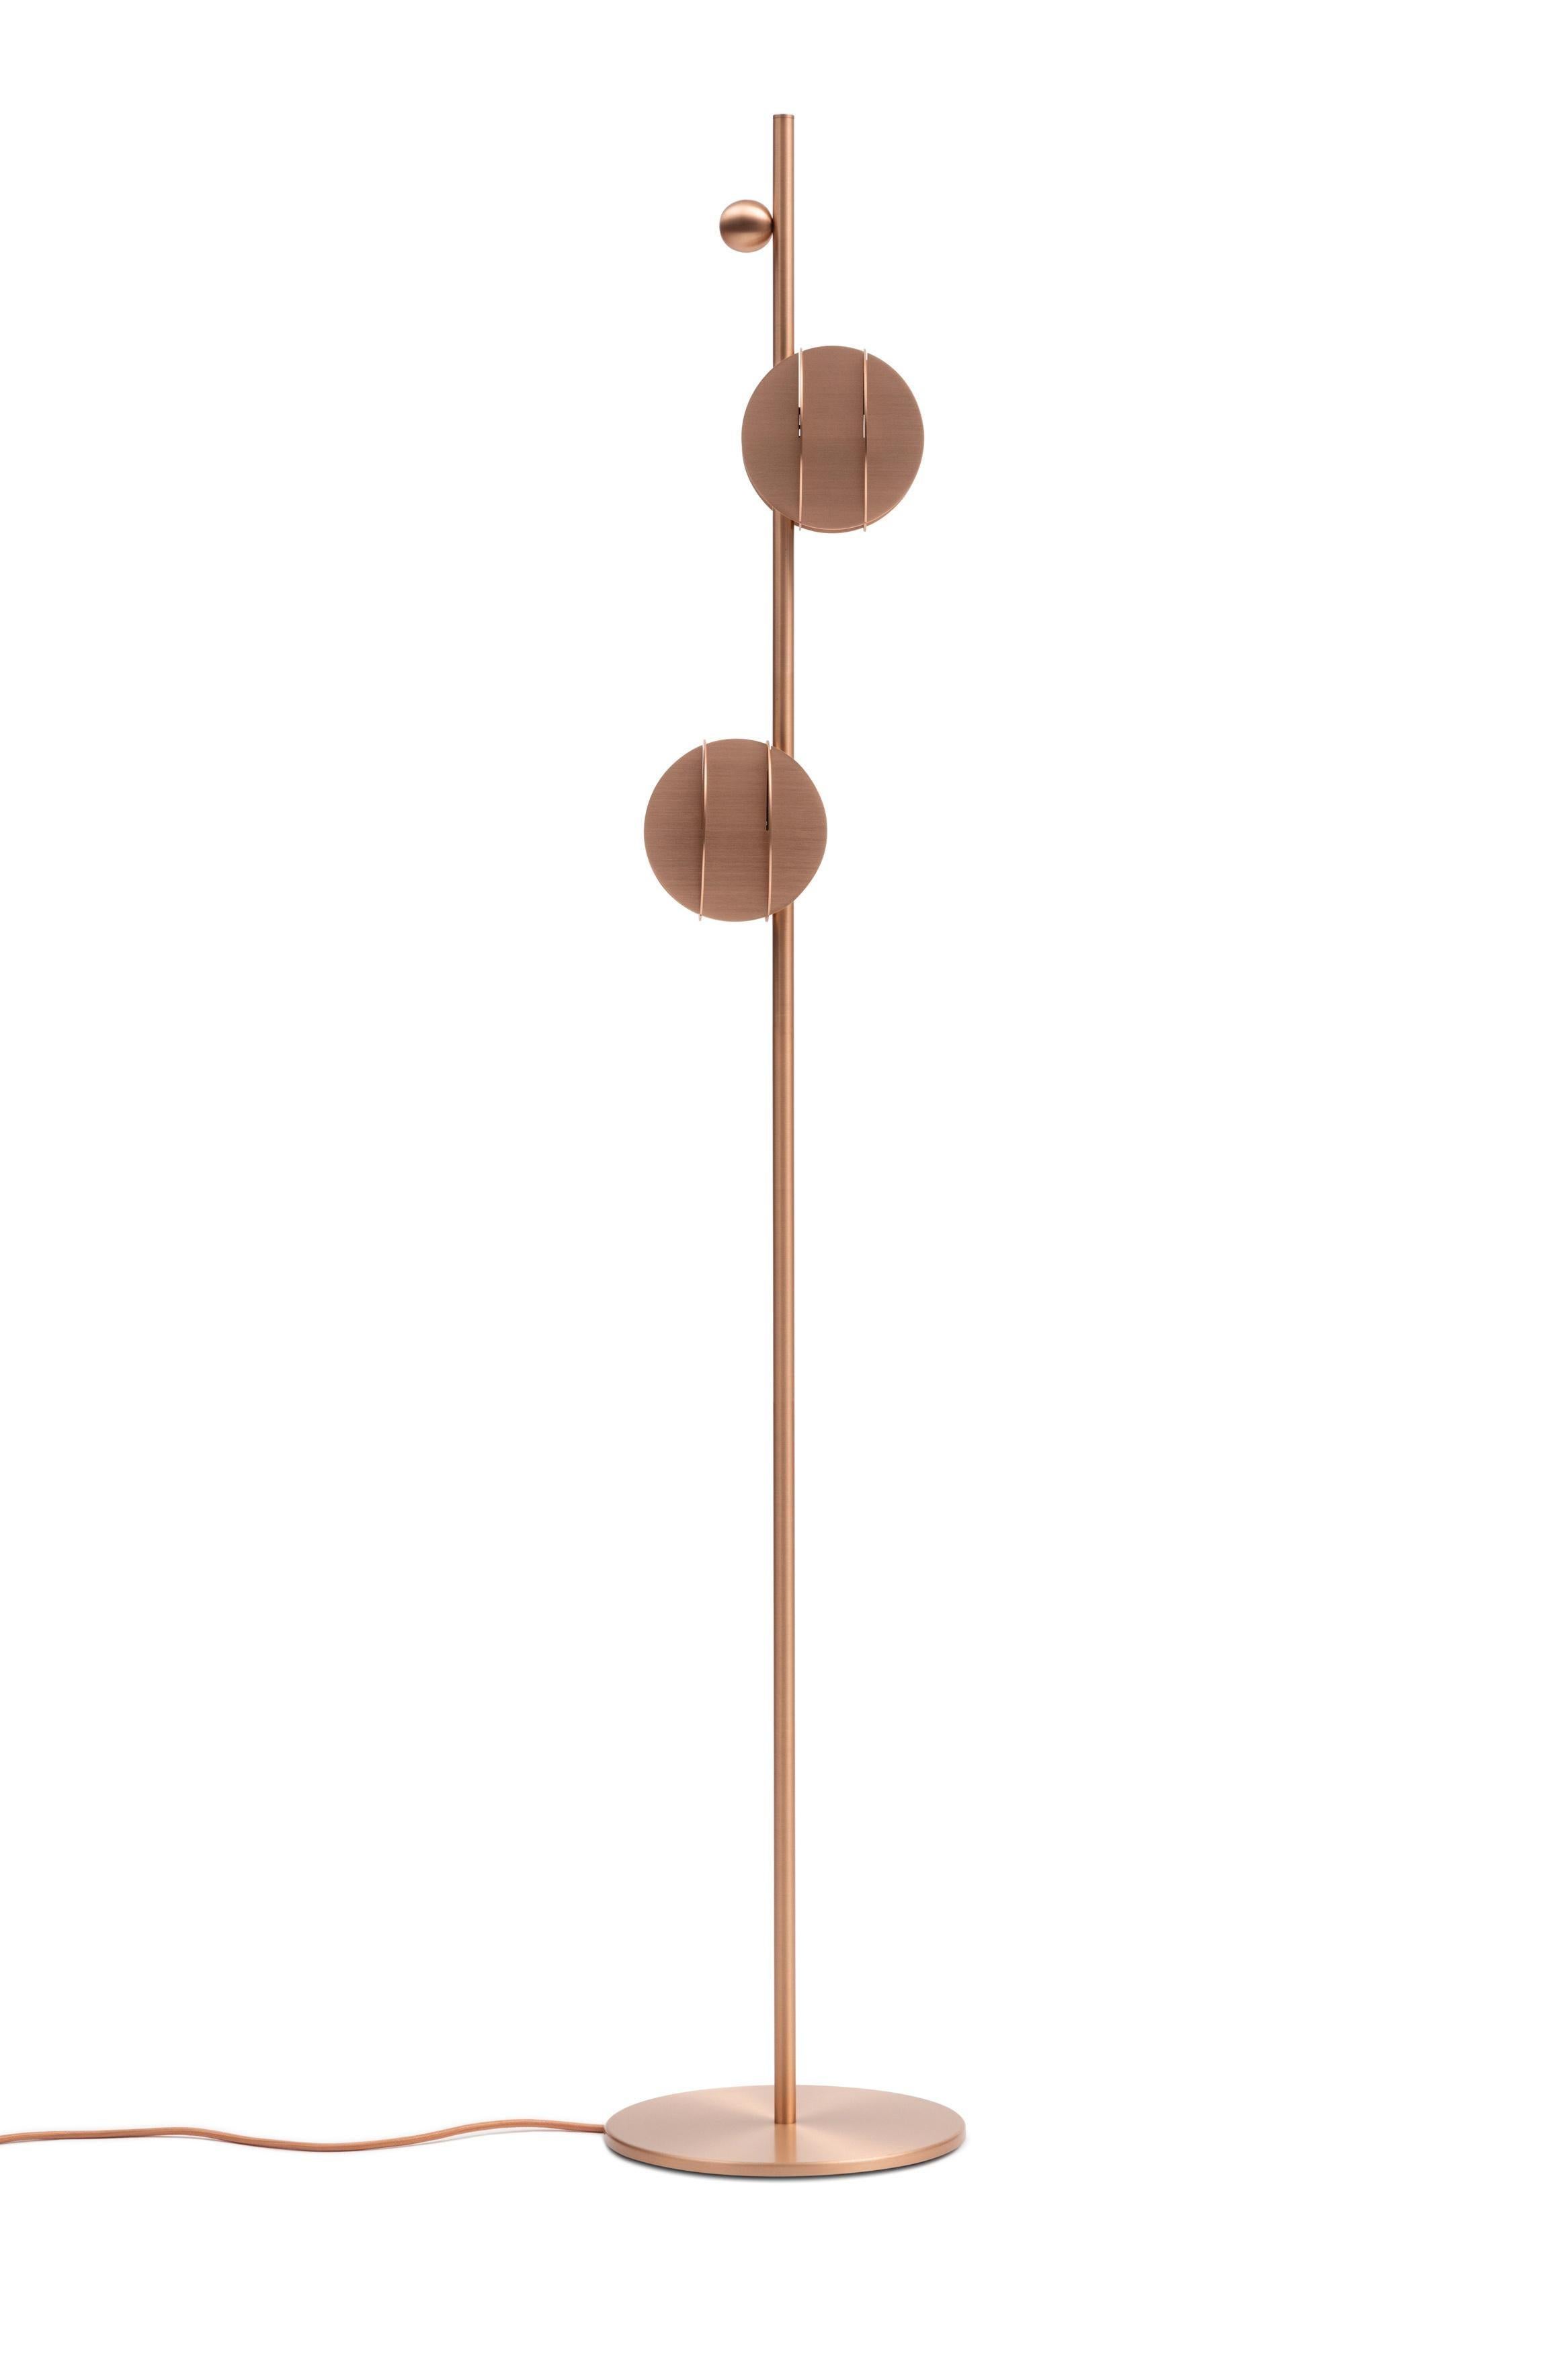 Brand: NOOM
Designer: Kateryna Sokolova
Materials: Copper / Brass / Stainless steel
Dimensions: H 170 cm x W 30 cm x D 30 cm
EU version: 2 x LED 10WG9220 -240V50 Hz
USA version: 2 x LED 10W G9 110V 60 Hz.

EL collection of lighting is inspired by